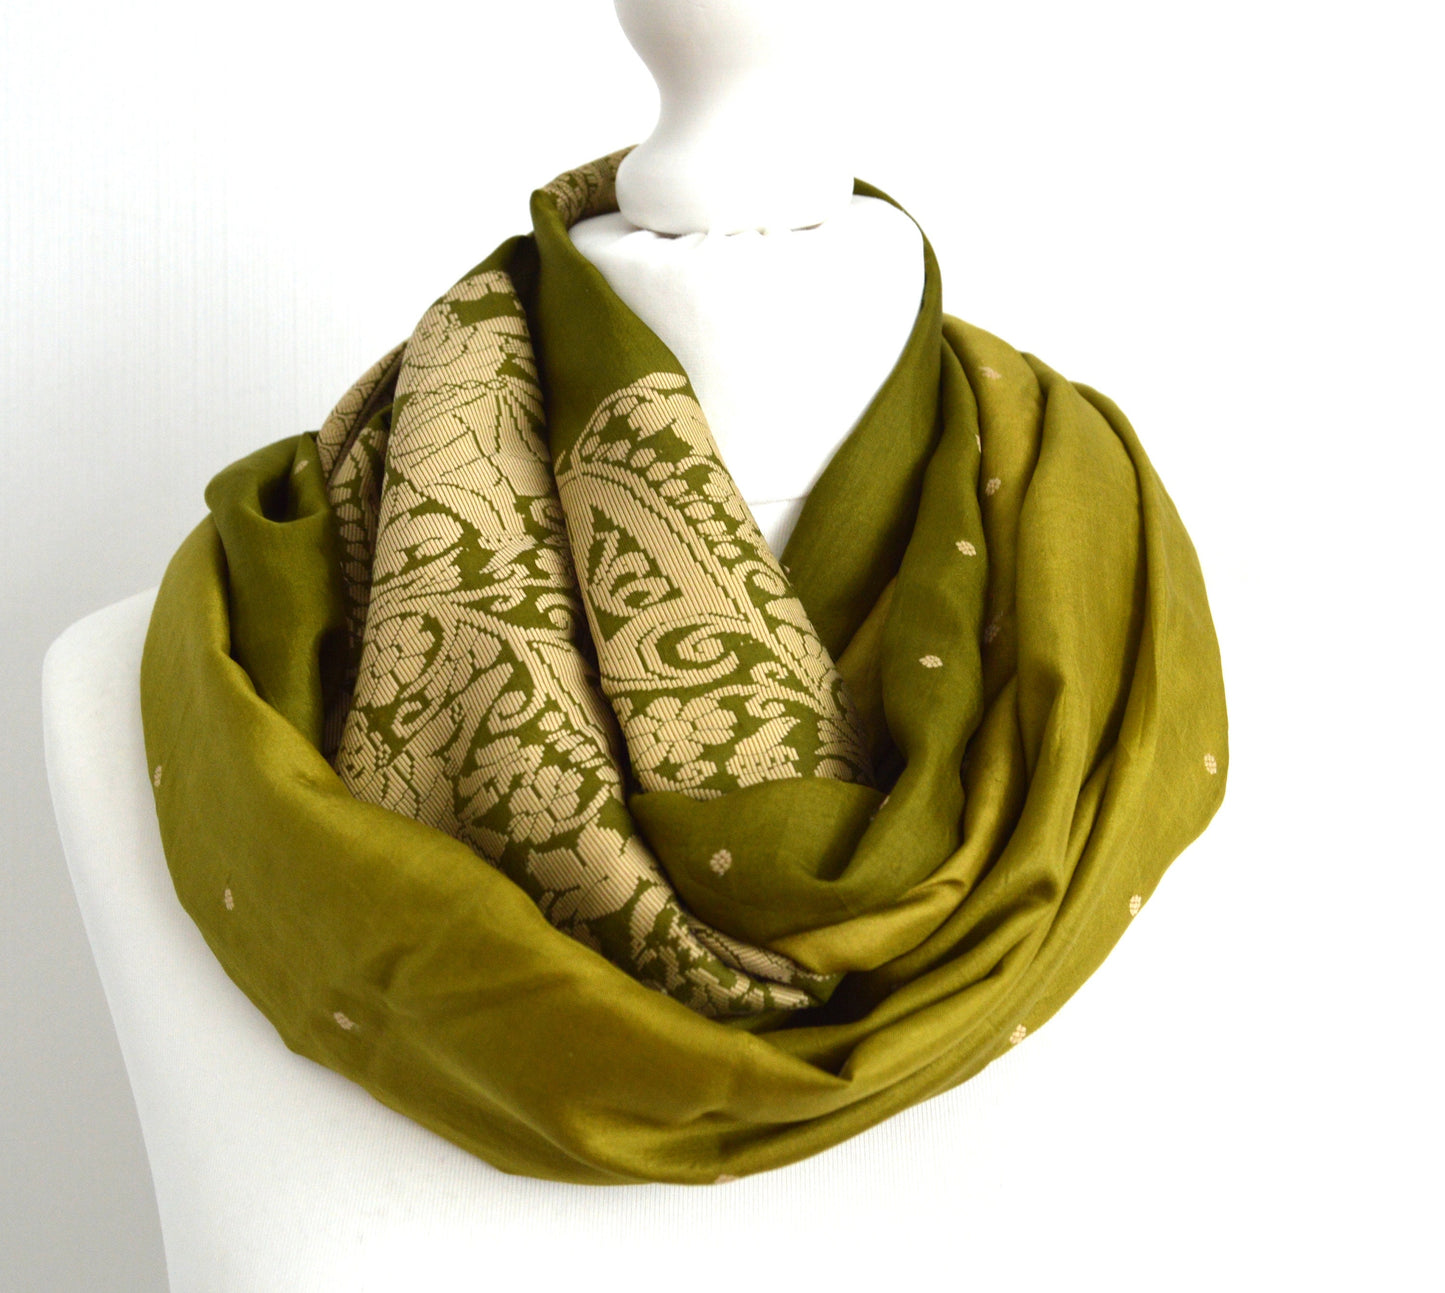 Beige Olive Silk Scarf - Eternity Scarf - Loop Scarf - Womens Scarf - Unisex Scarf - Gift for Her - Gift for Him - Green Silk Scarf - OOAK